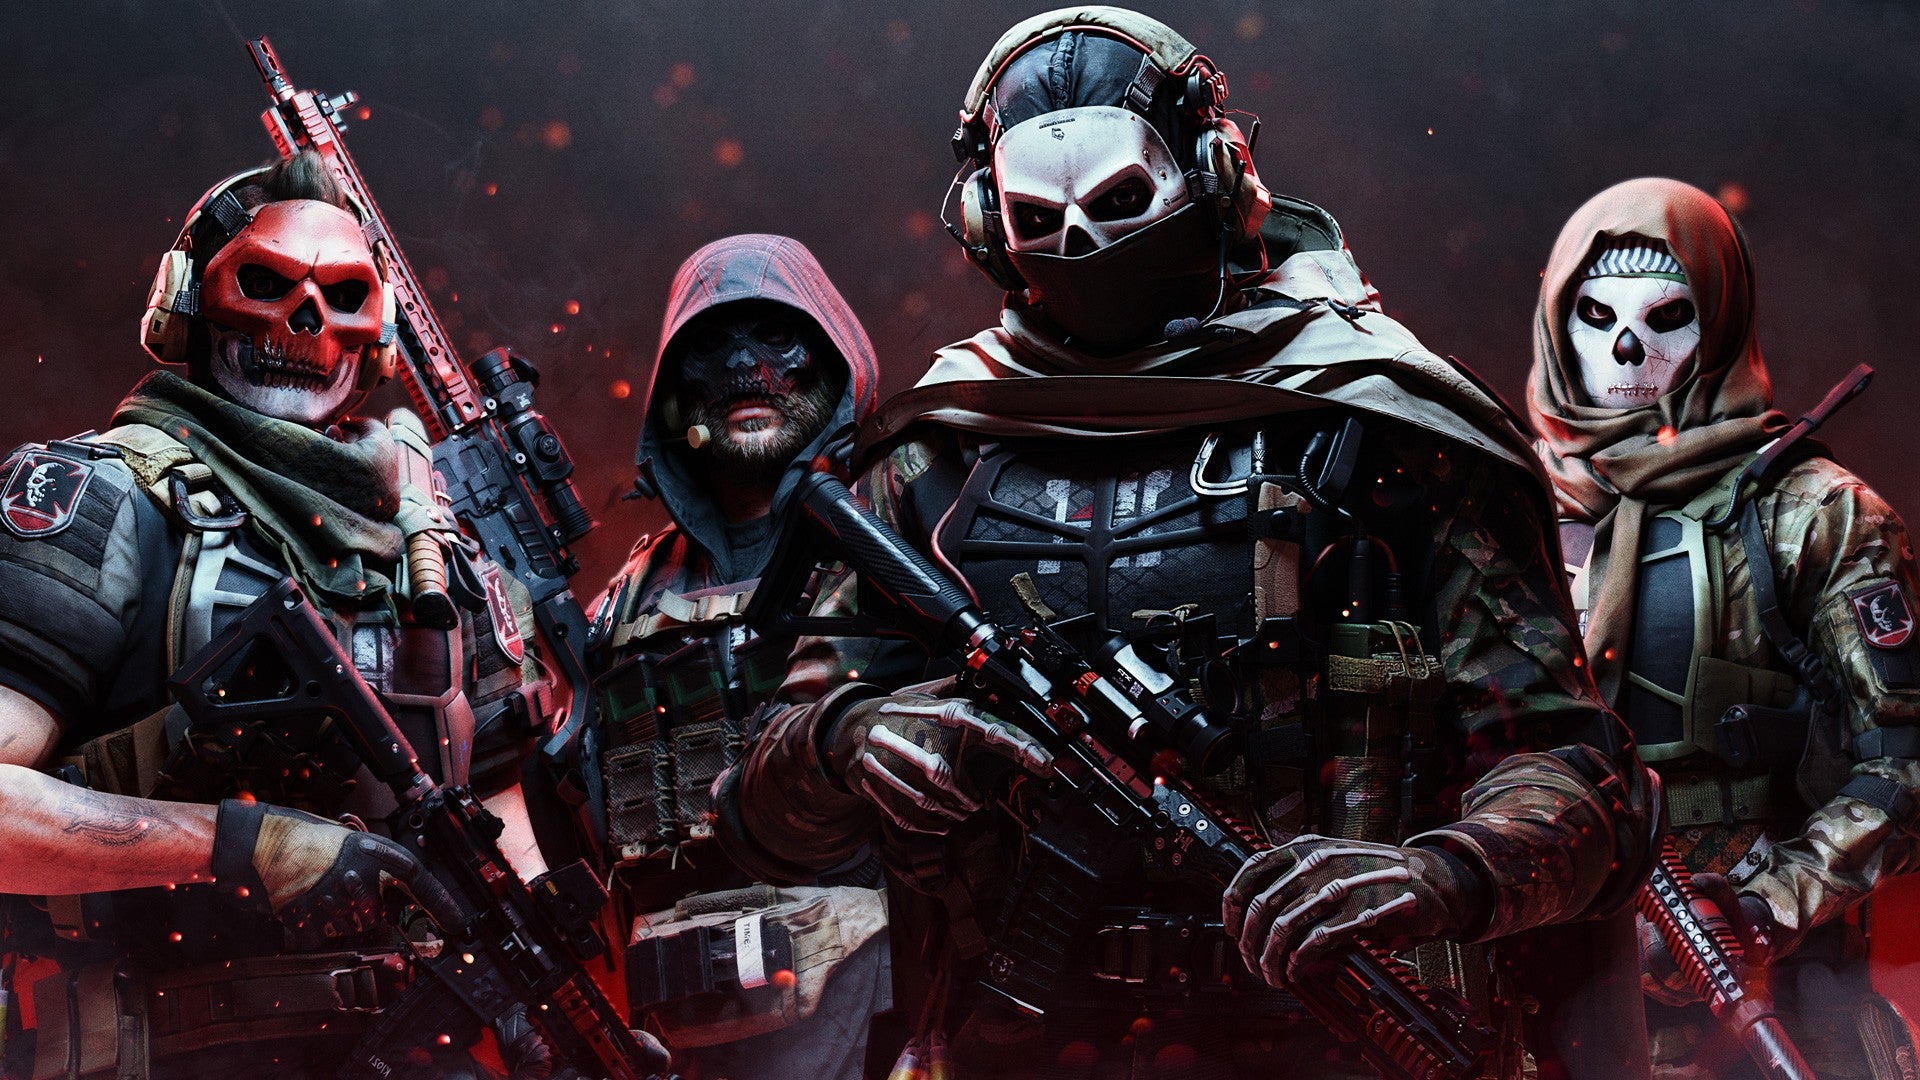 Ghost, Farah, Price, and Soap in the Red Team 141 vault edition skins, against a dark background with a red hue at the bottom.